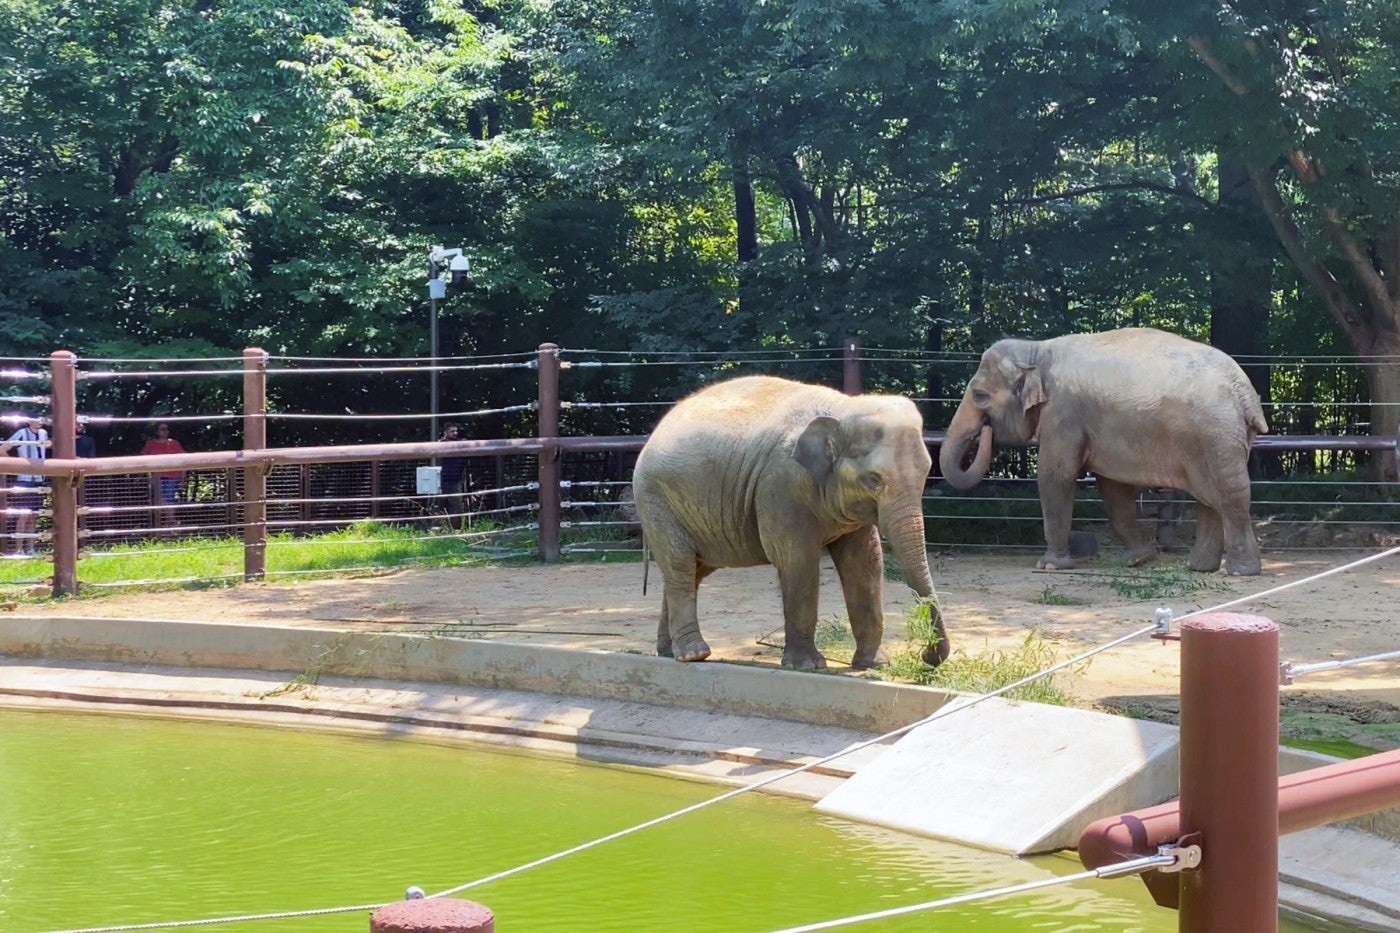 Asian elephants Trong Nhi (background) and Nhi Linh (foreground) explore outdoor habitat 1 at the Elephant Trails exhibit.